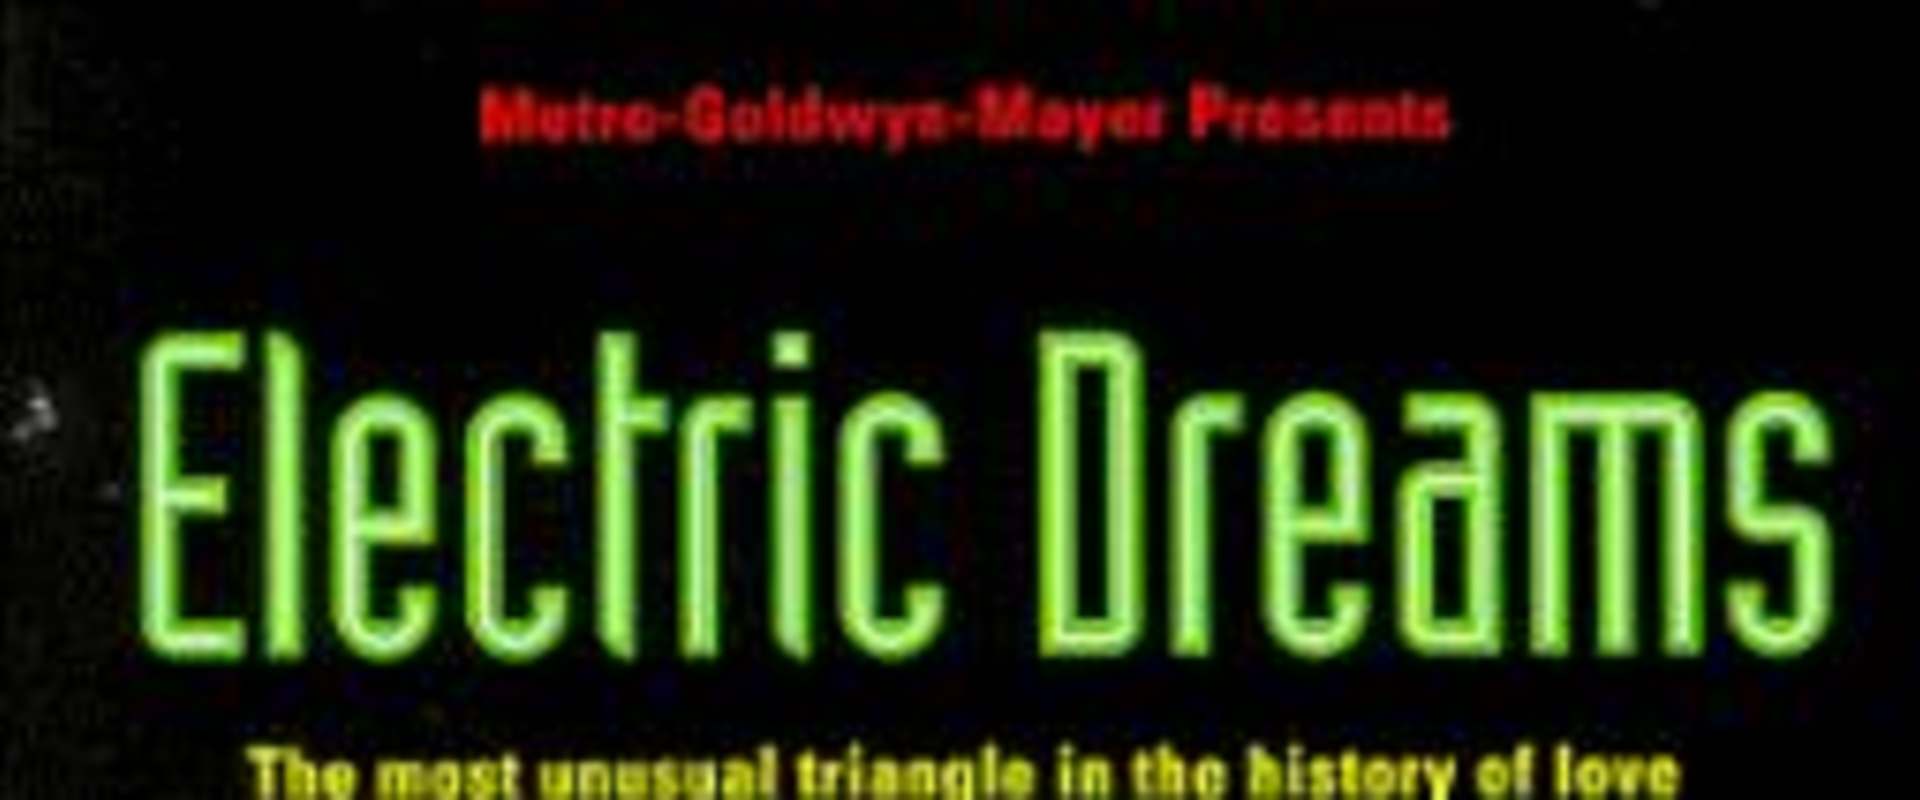 Electric Dreams background 2